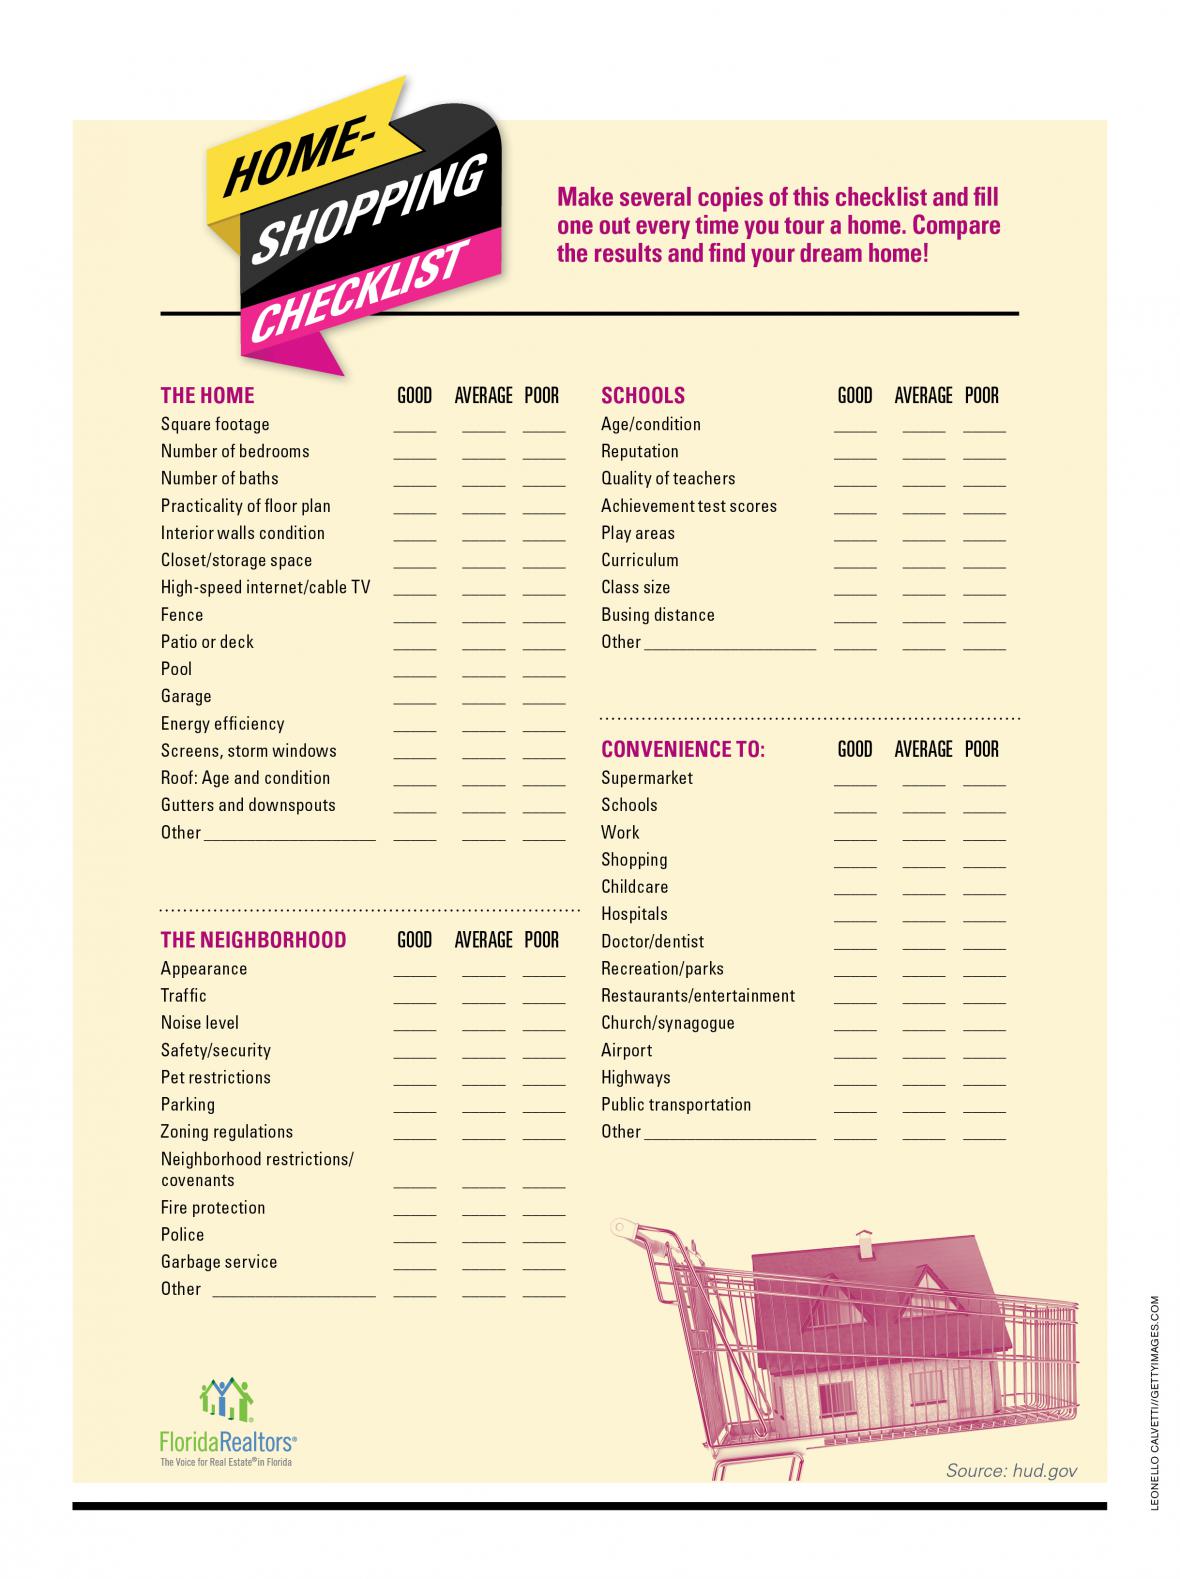 Home Buying Checklist infographic